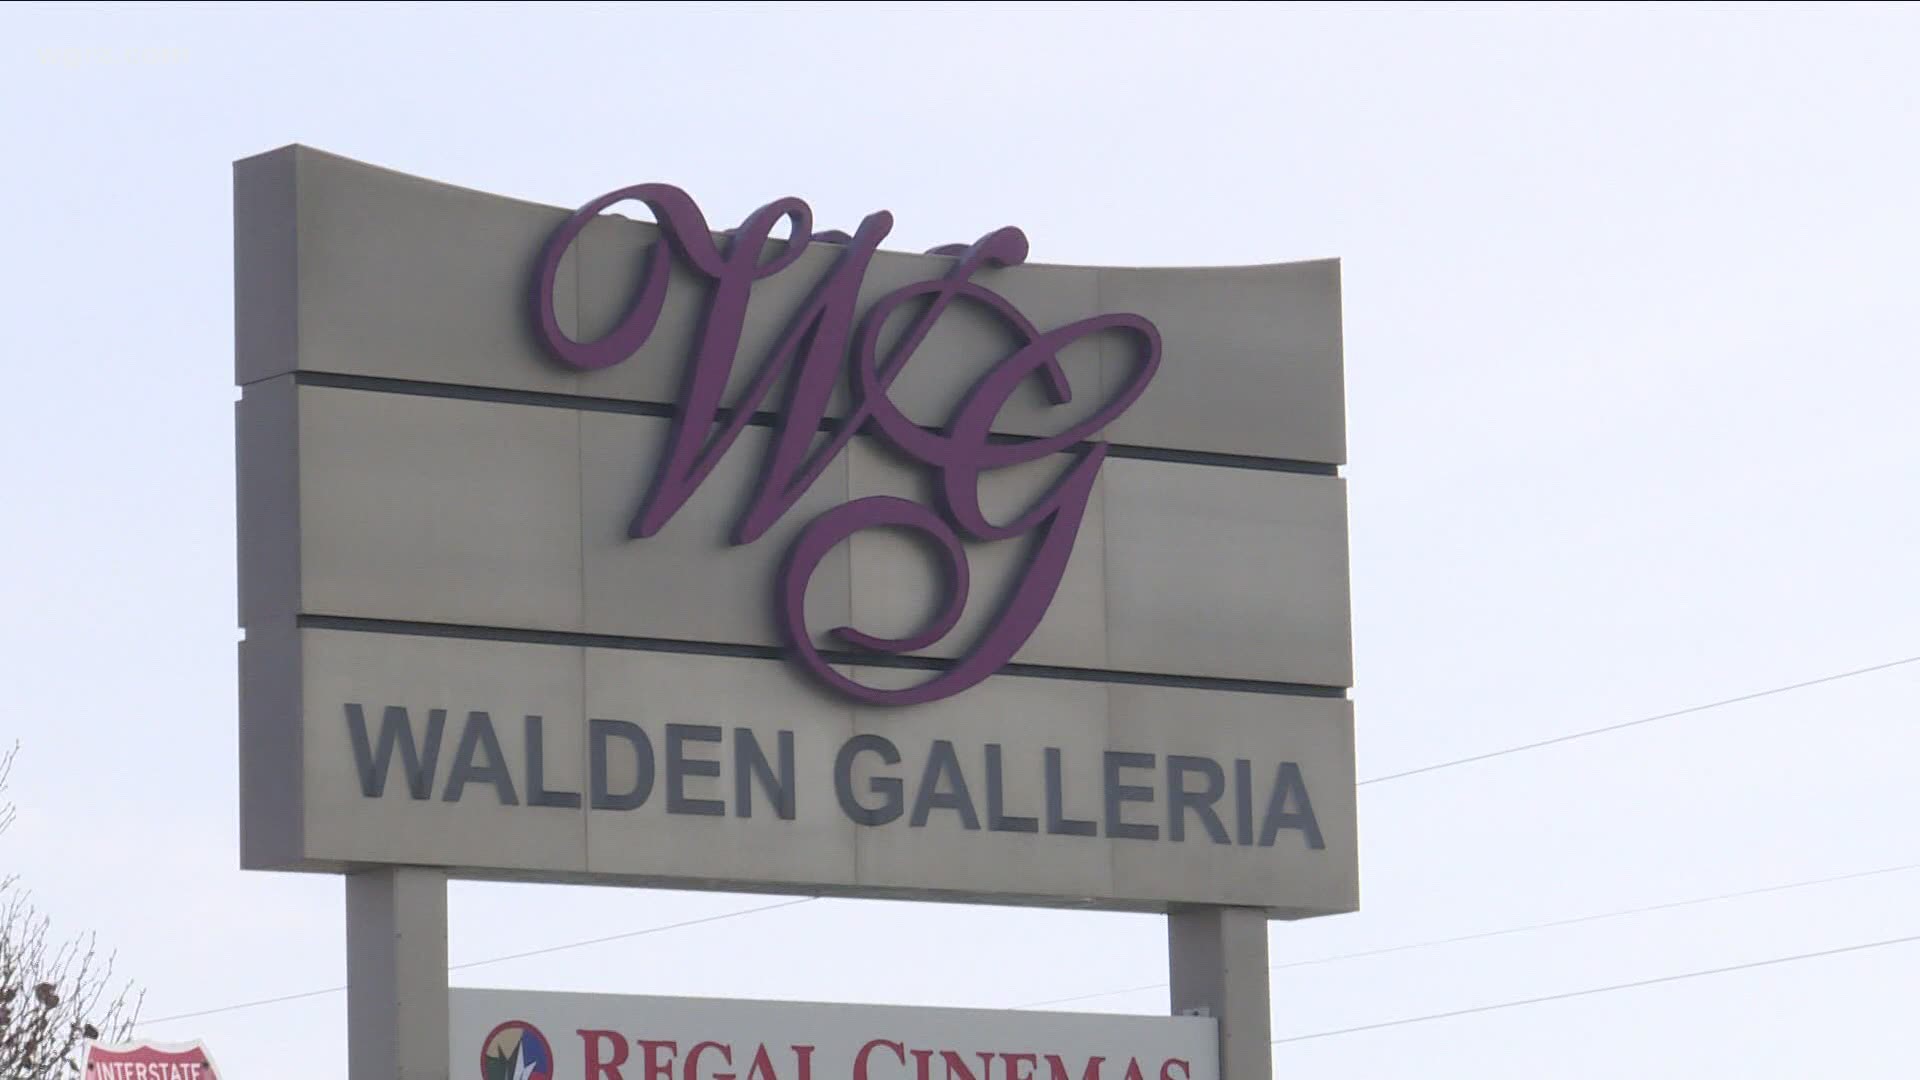 Local business leaders who are calling for the reopening of indoor malls to happen within phase 3 are holding a press conference Tuesday morning.